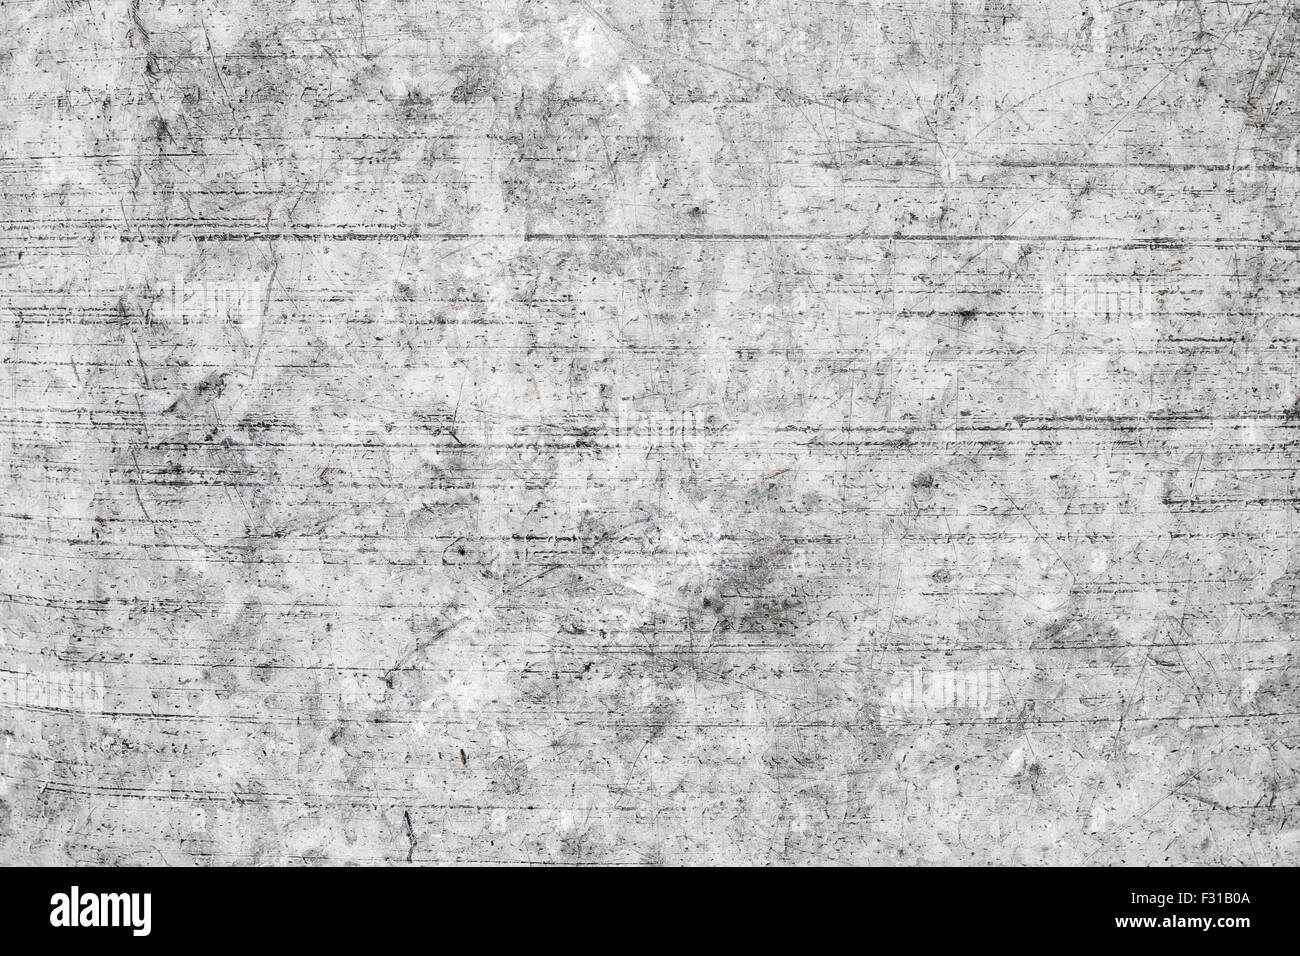 Old grungy metal sheet, background photo texture Stock Photo